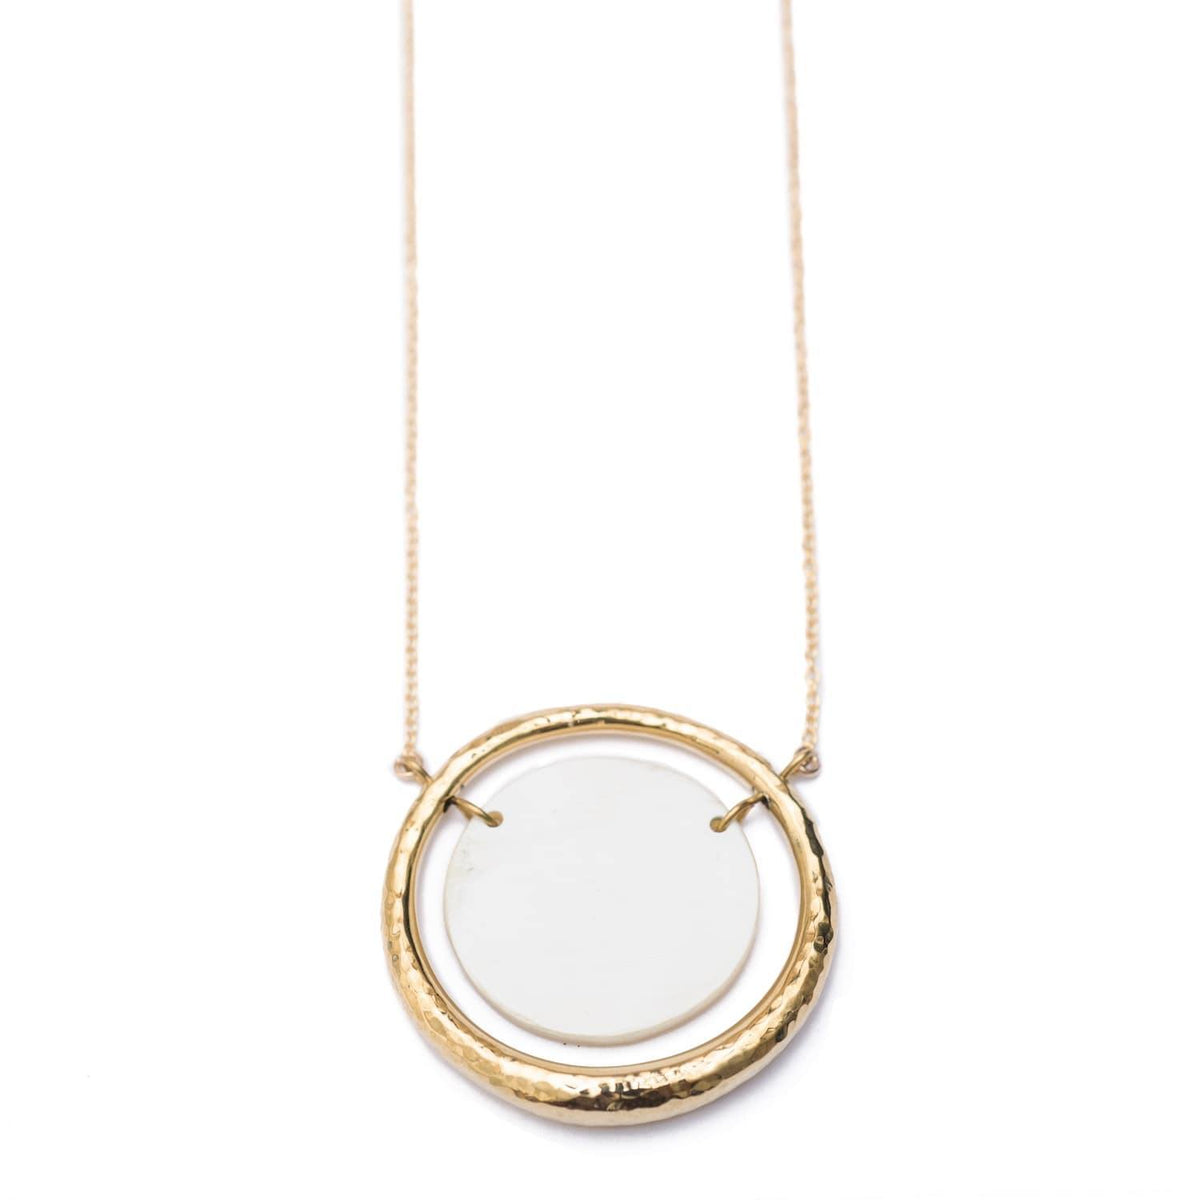 Elegant suspended gold plated hollow circular pendant with a white circle in the middle strung on a gold plated chain